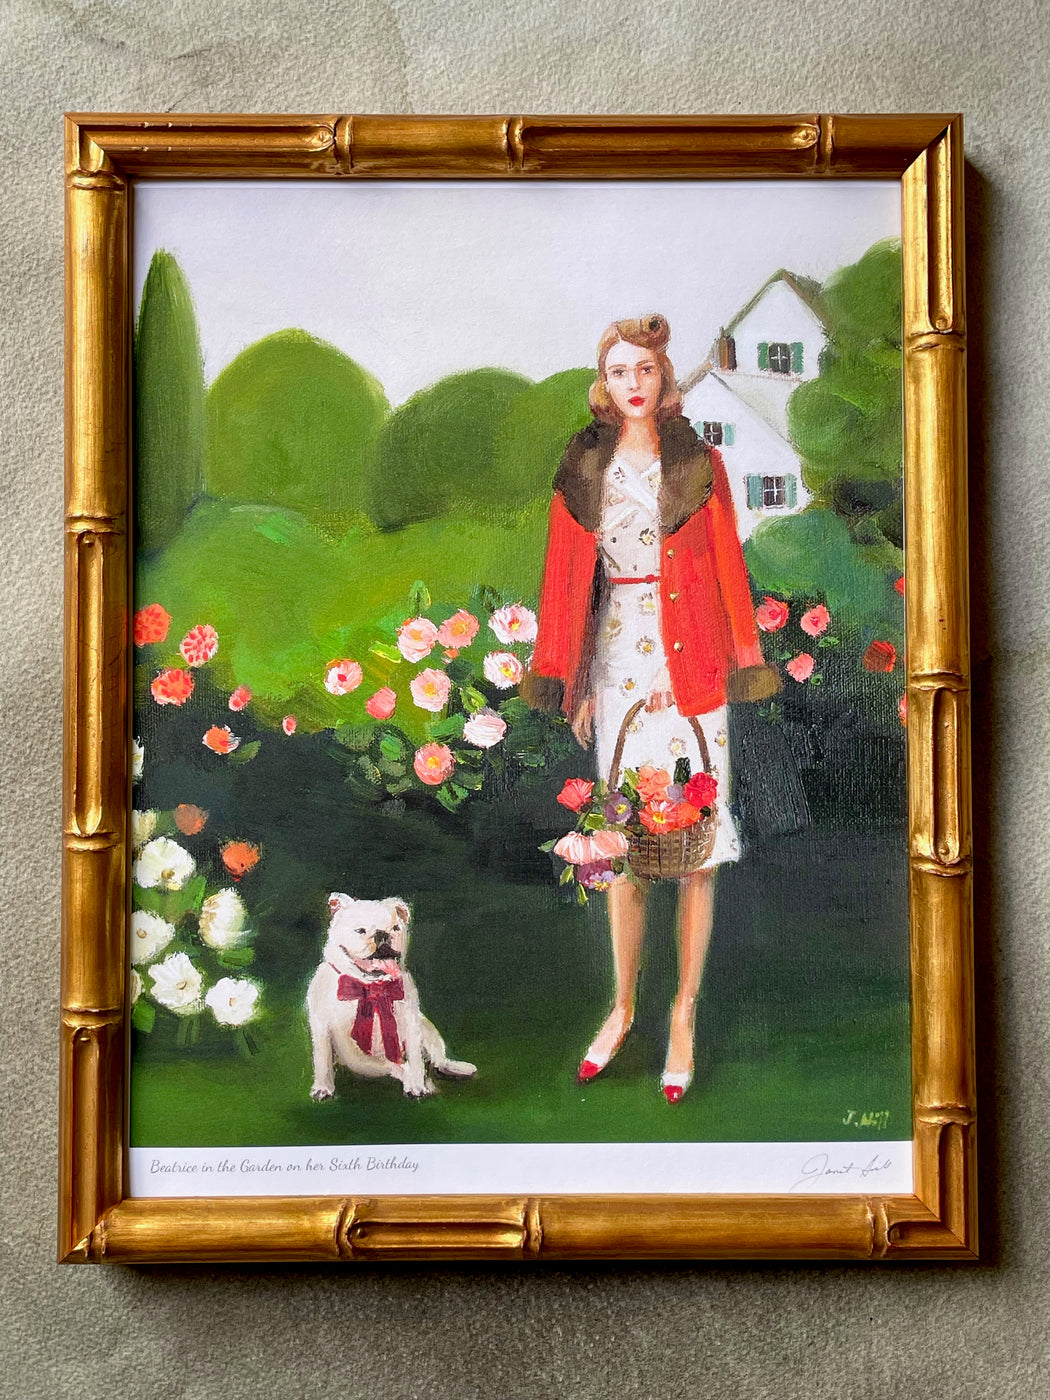 "Beatrice in the Garden on her Sixth Birthday" by Janet Hill